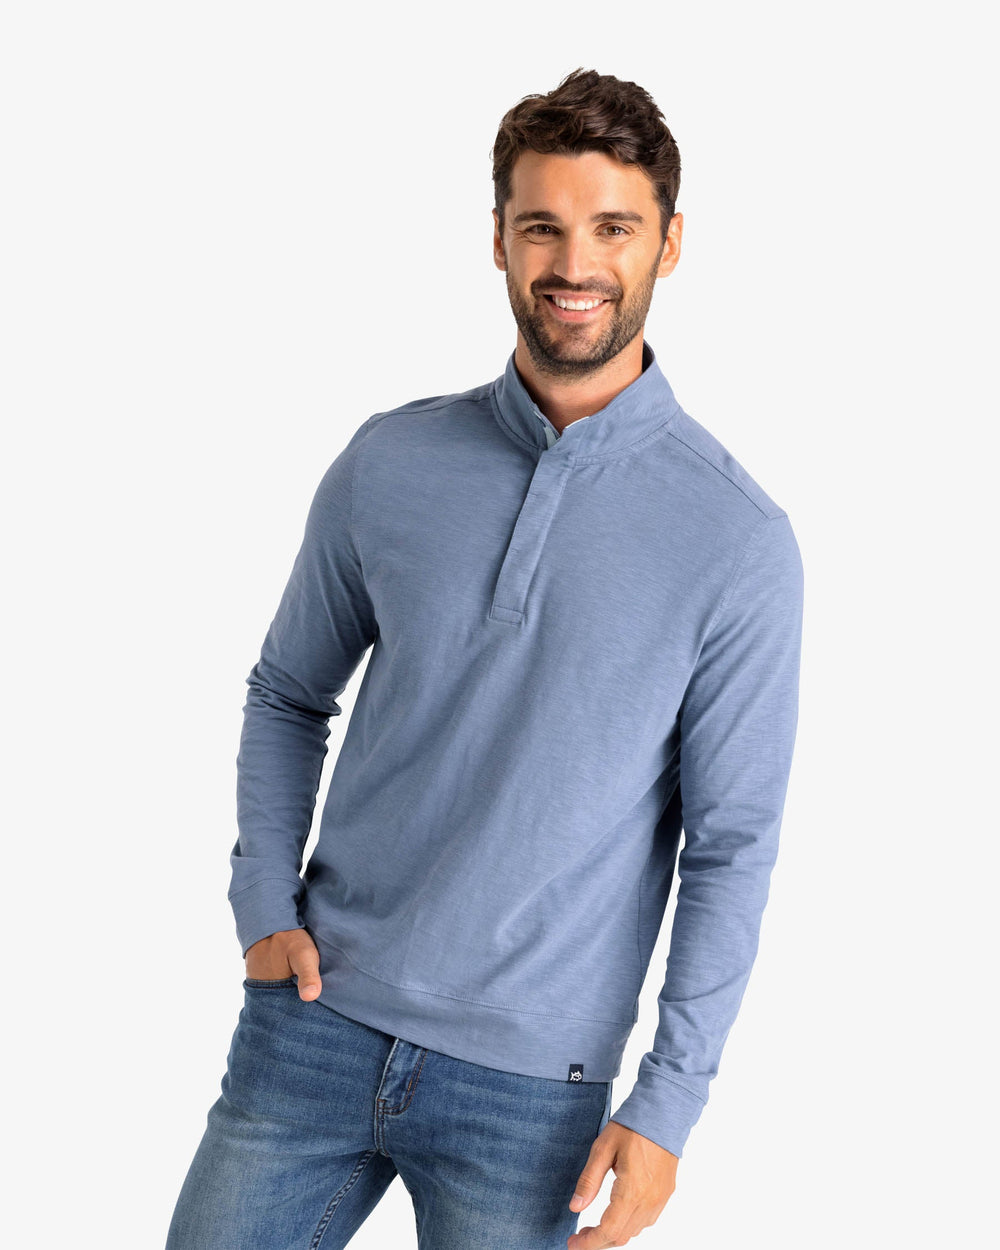 The front view of the Sun Farer Ocean View Quarter Button Pullover by Southern Tide - Blue Haze